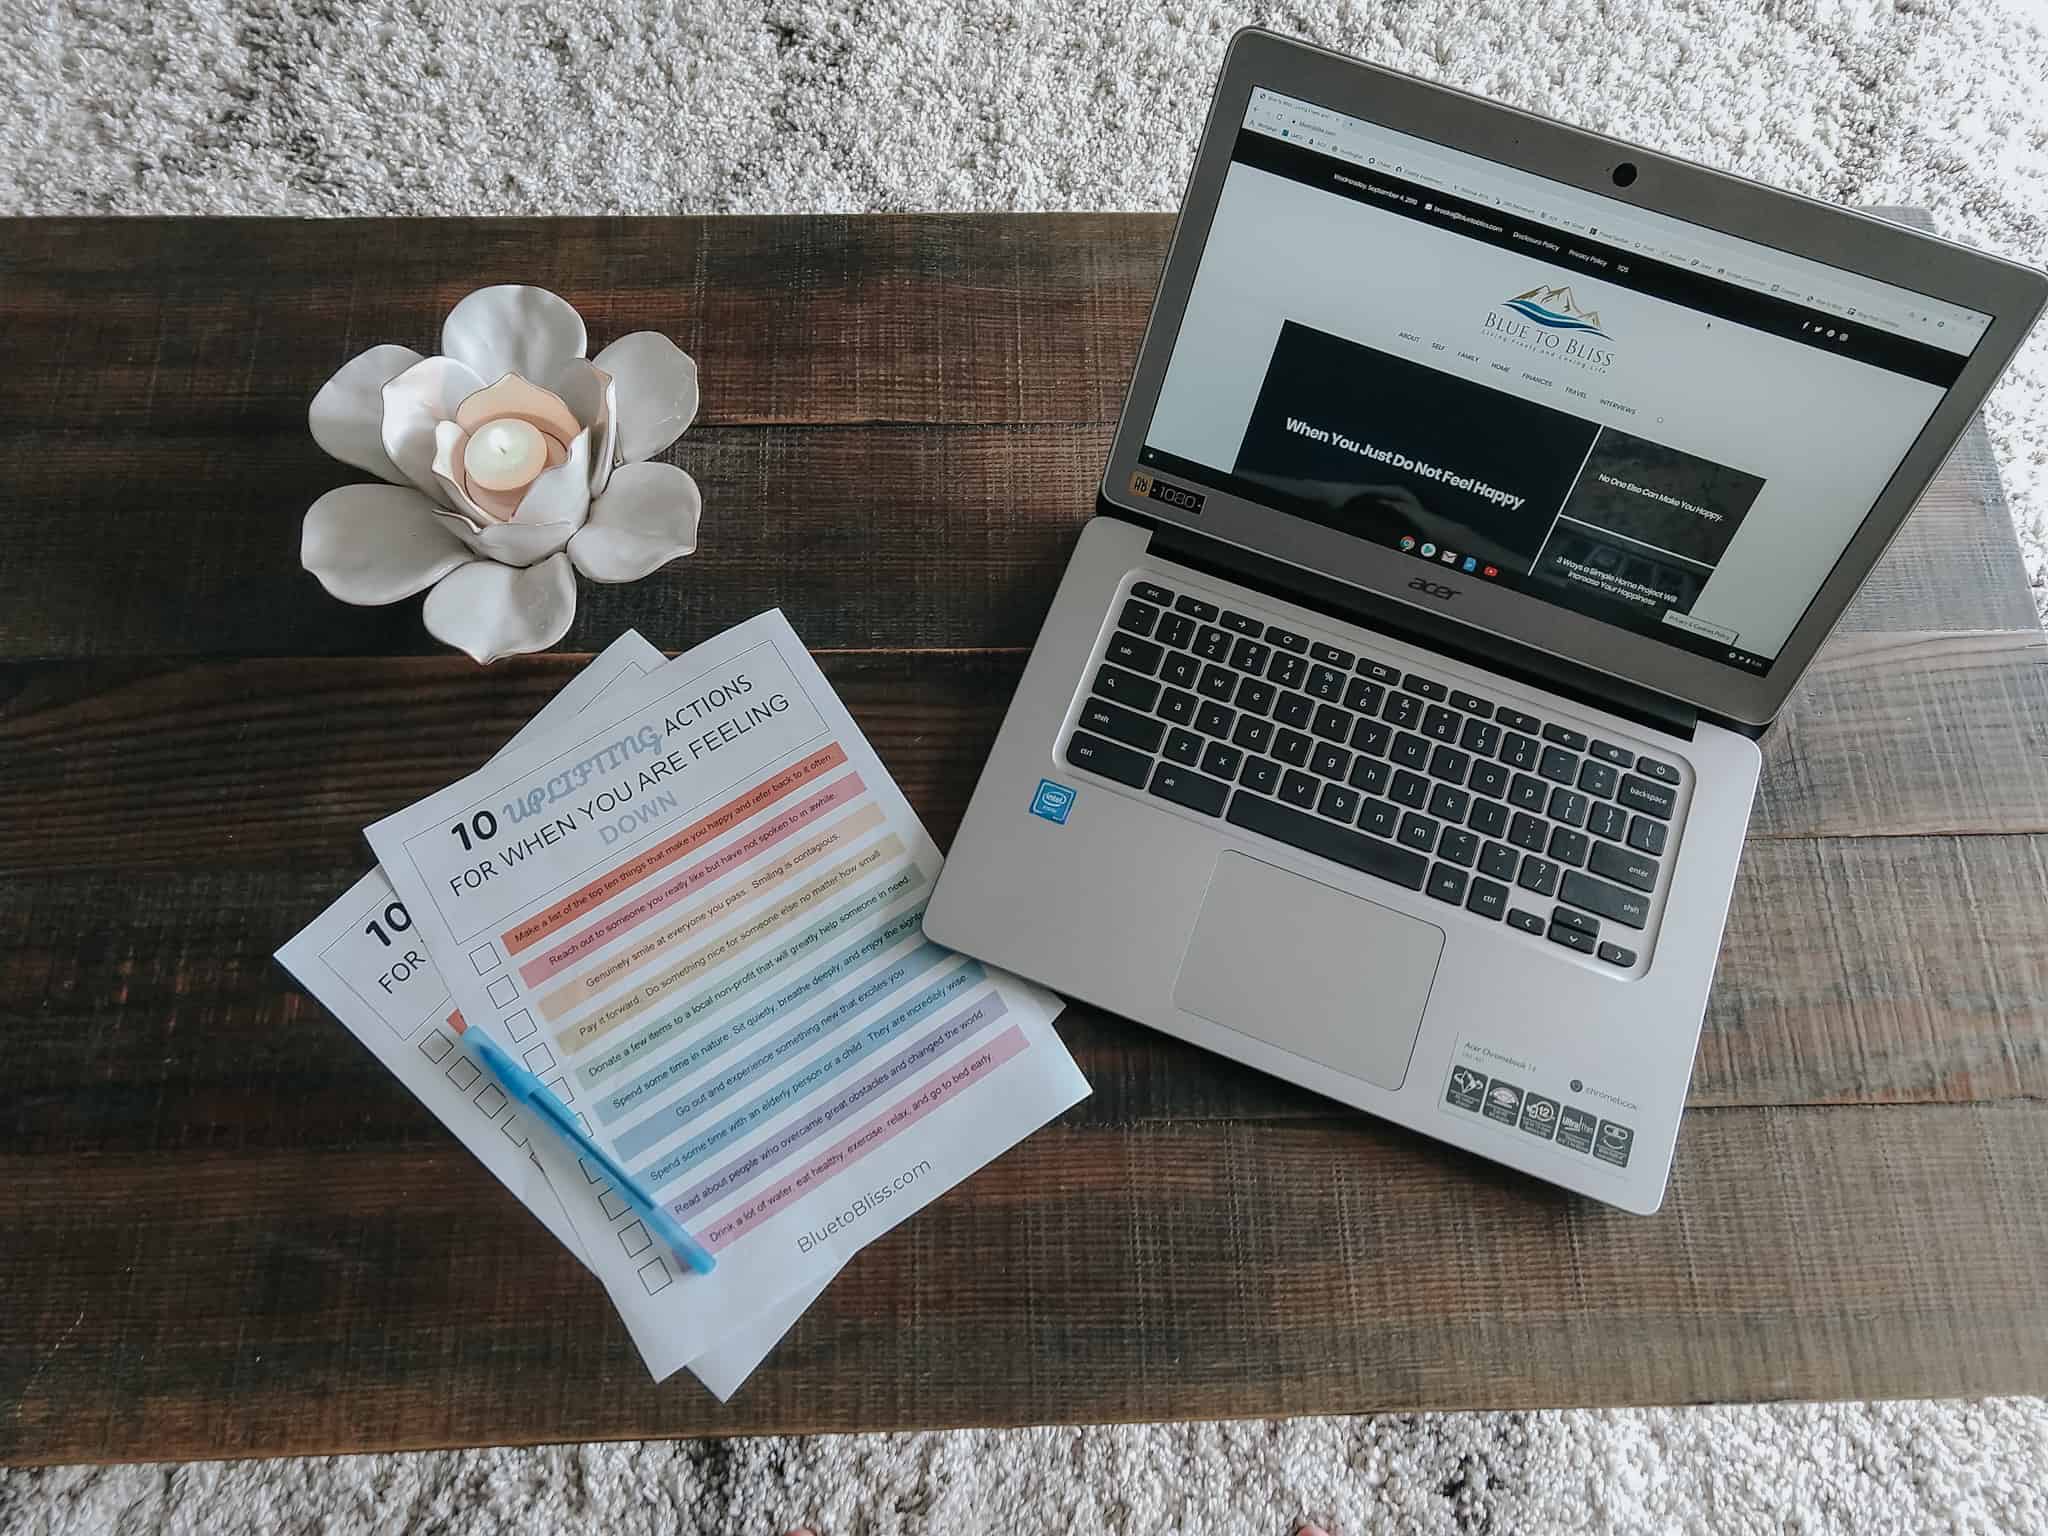 Laptop and checklists for lifestyle blog Blue to Bliss